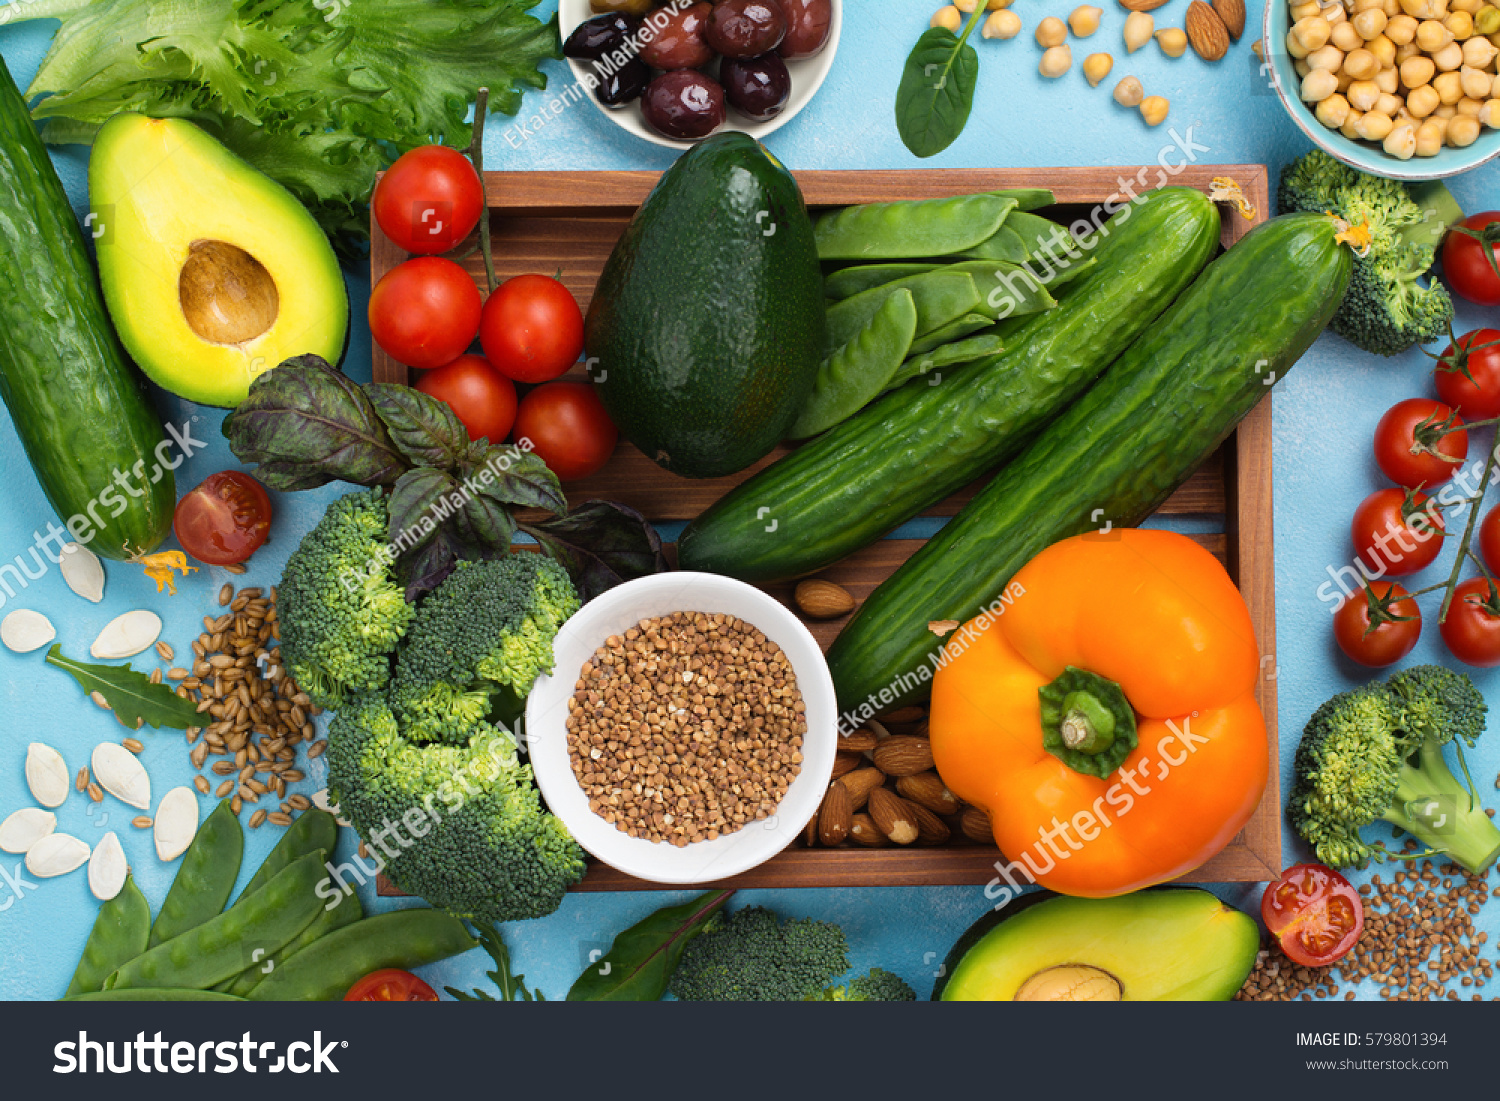 Healthy diet concept. Olives, lettuce, tomato, chickpeas, buckwheat on summer background. Space for text #579801394